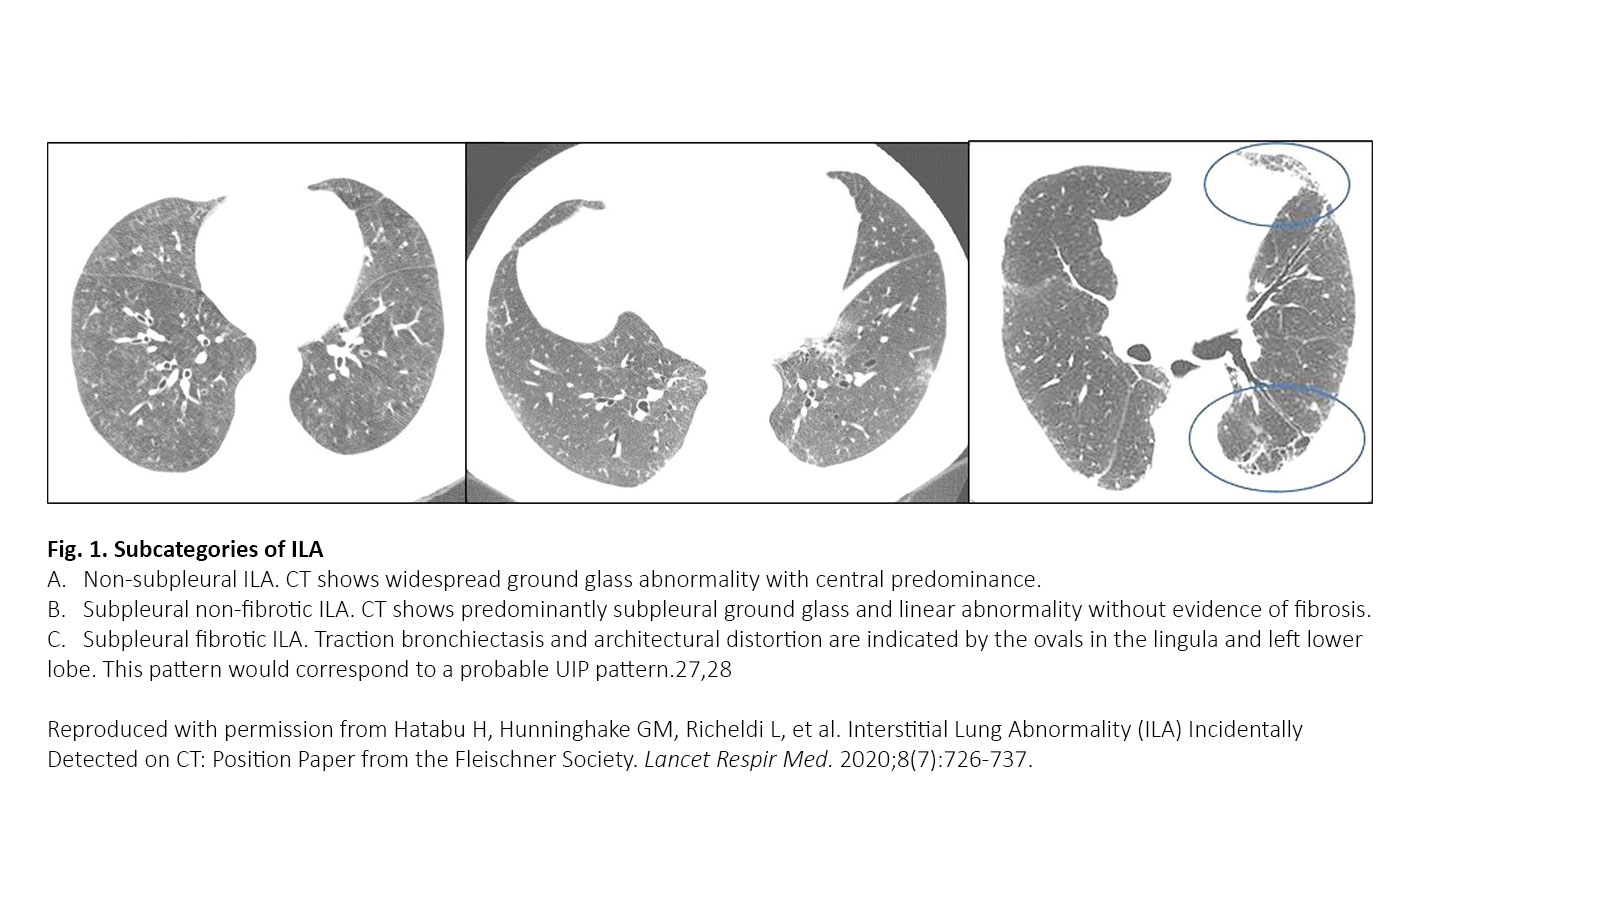 Interstitial Lung Abnormality, Interstitial Lung Disease, and Lung Cancer